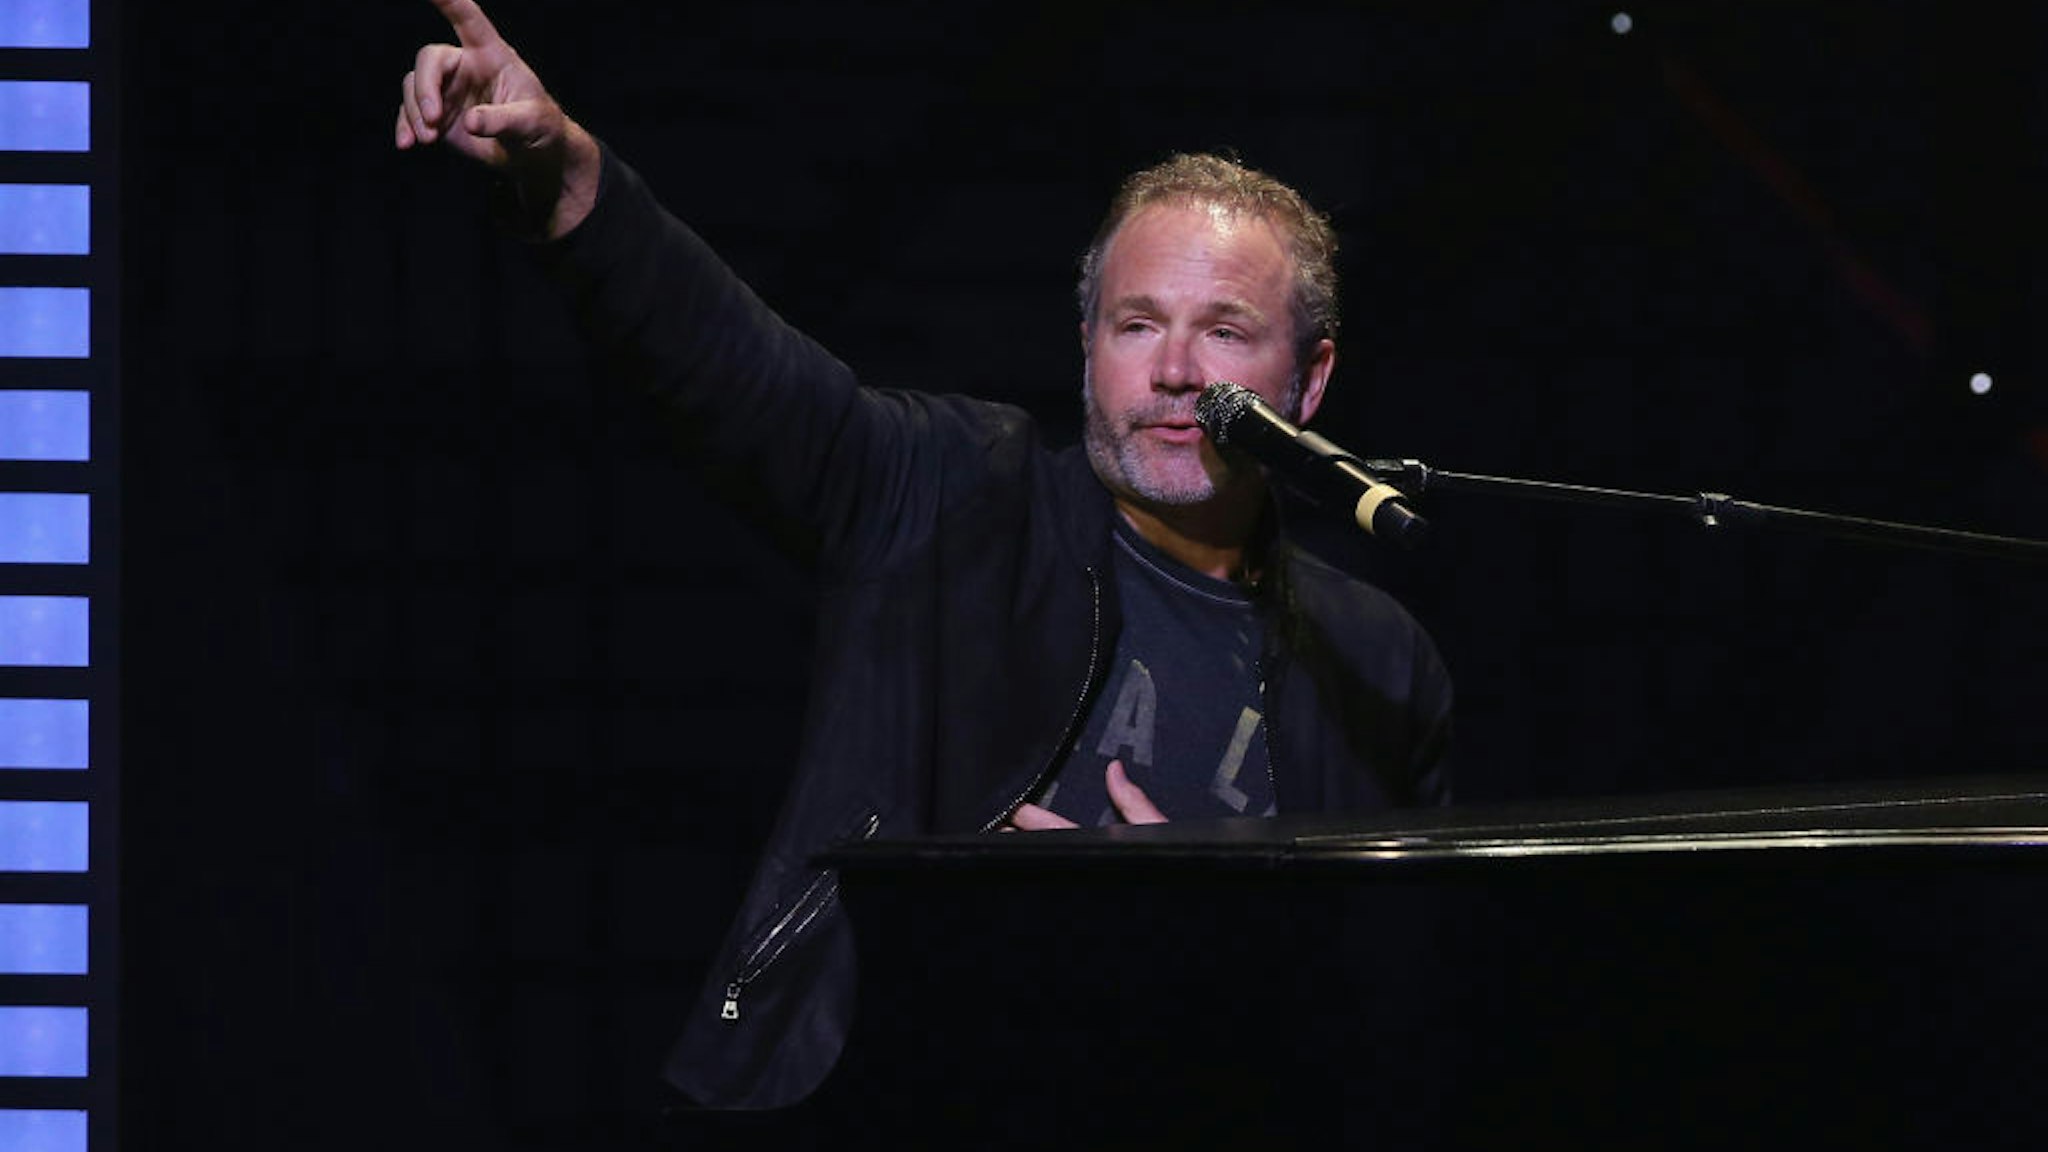 John Ondrasik of Five for Fighting performs during the REO Speedwagon benefit concert at Fred Kavli Theatre on January 13, 2019 in Thousand Oaks, California.